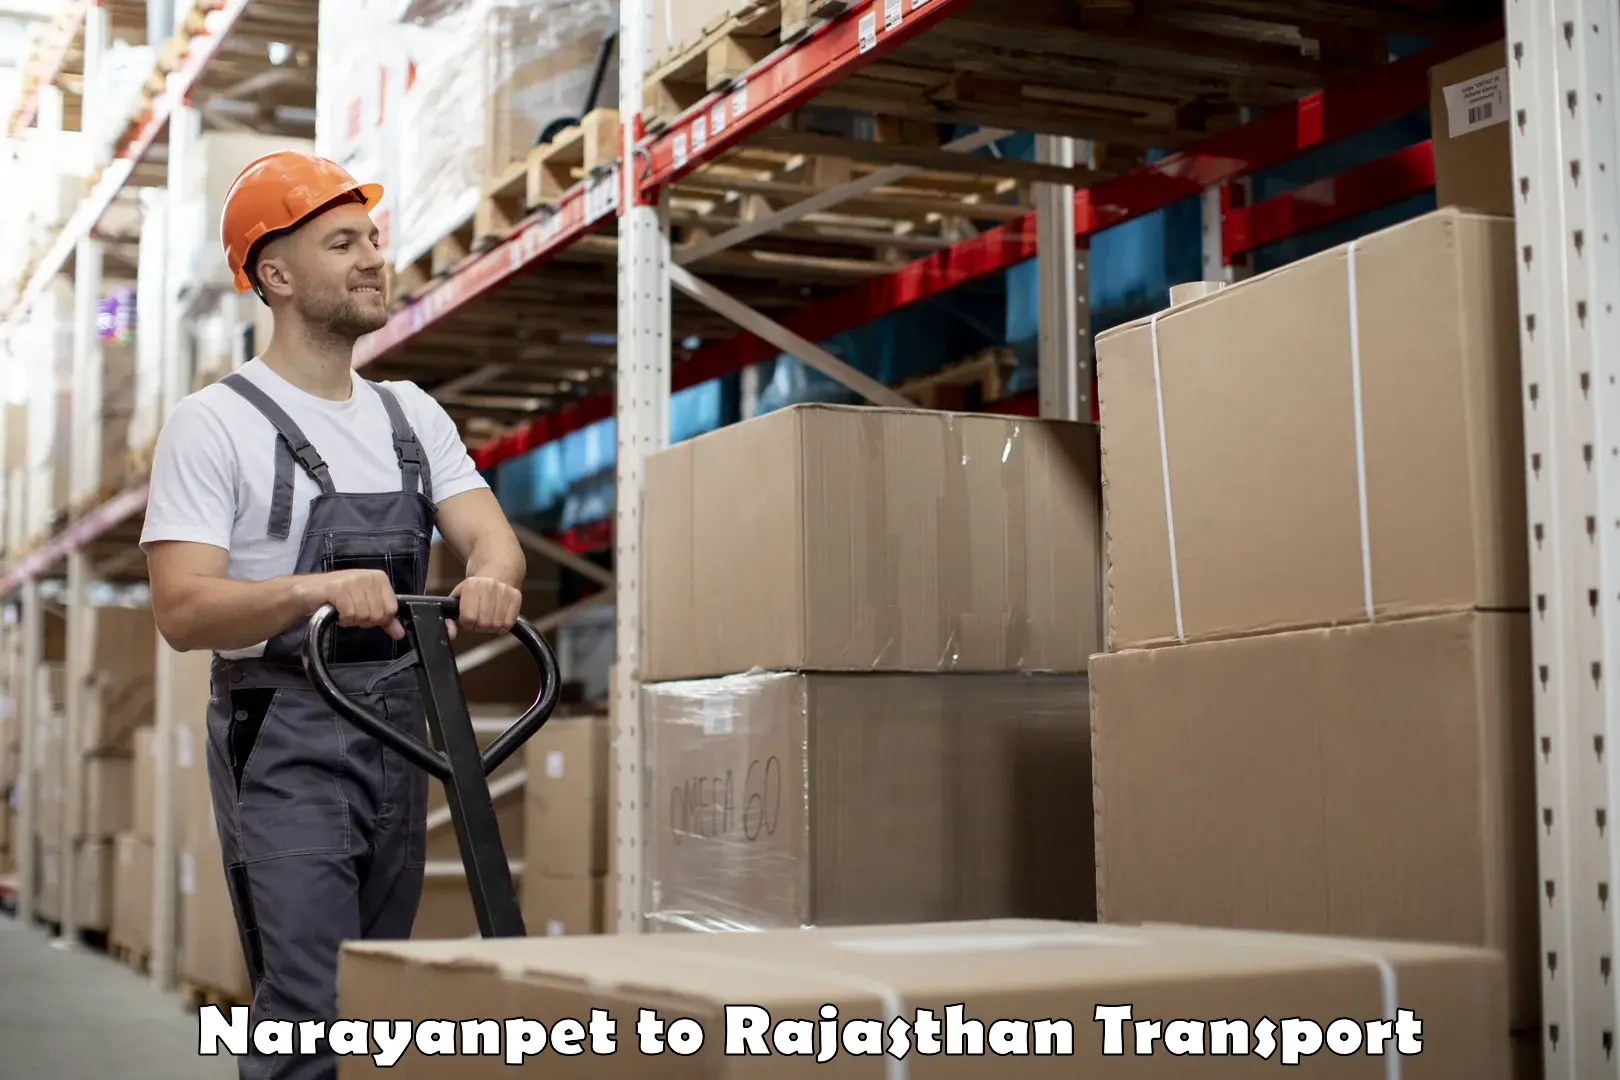 Road transport online services Narayanpet to Rajasthan